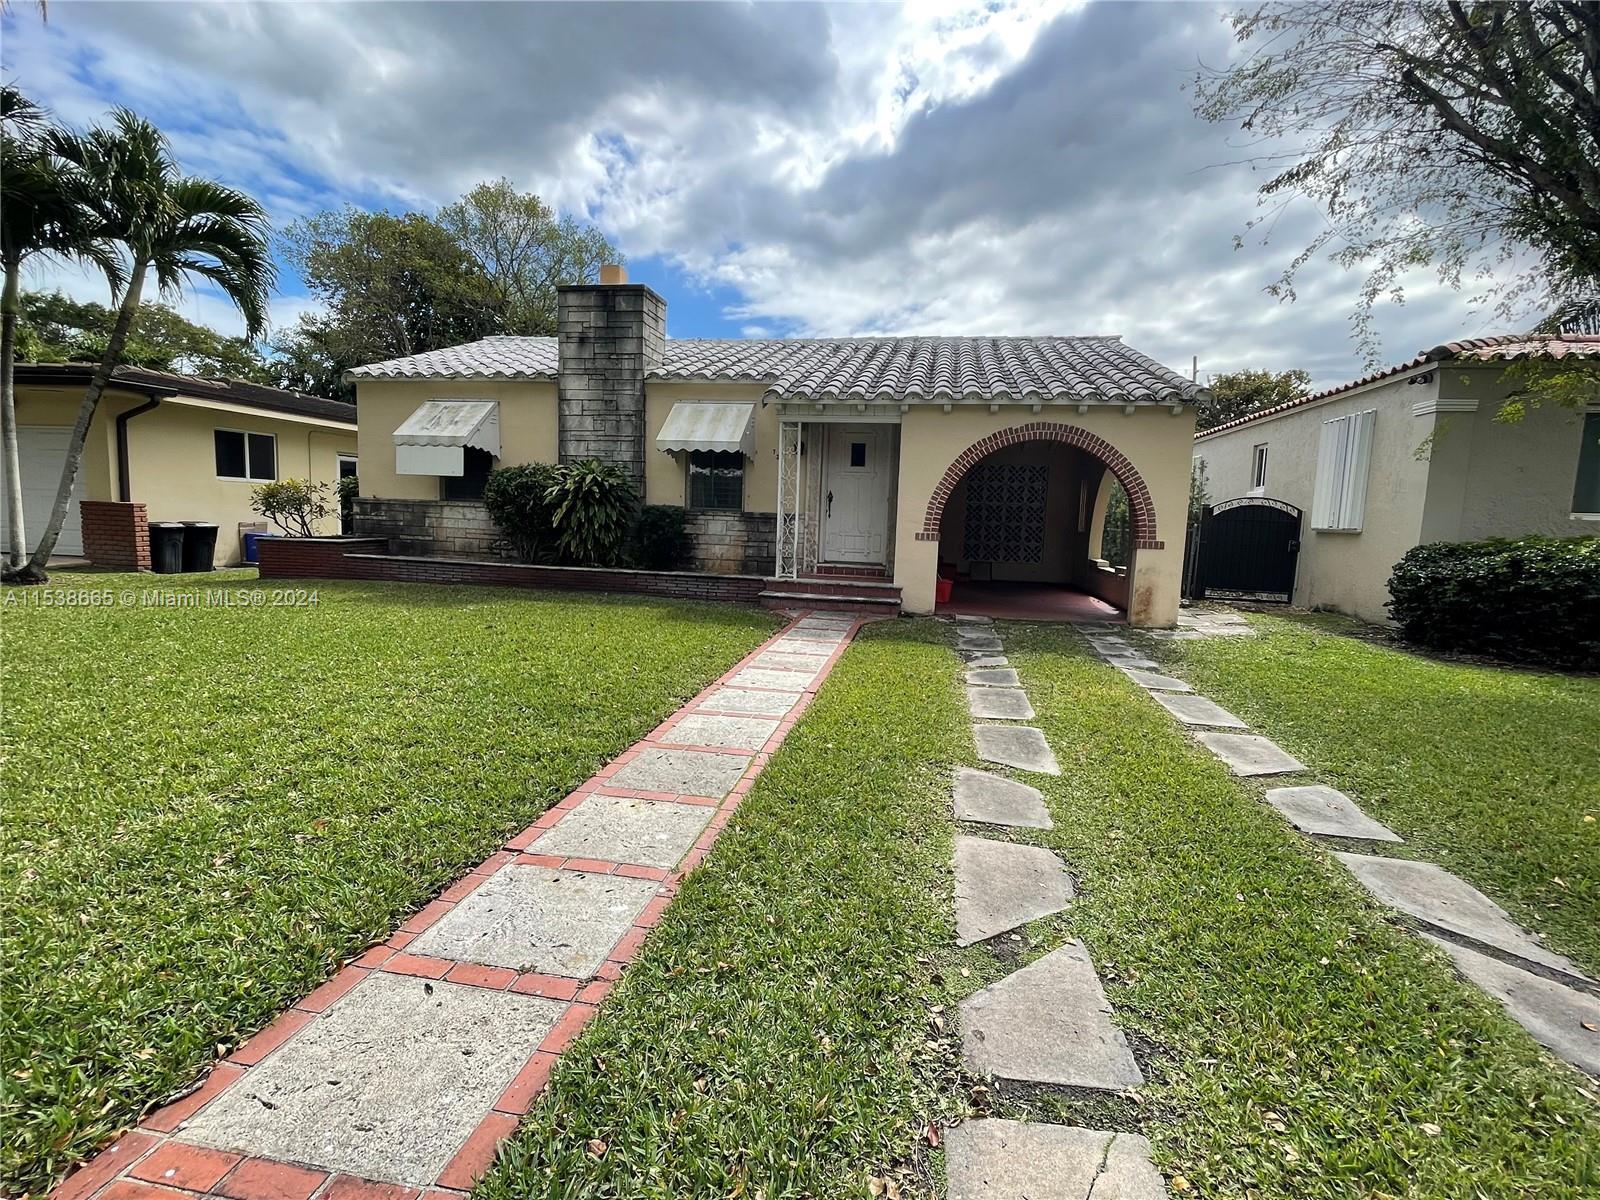 Photo of 720 Madeira Ave in Coral Gables, FL